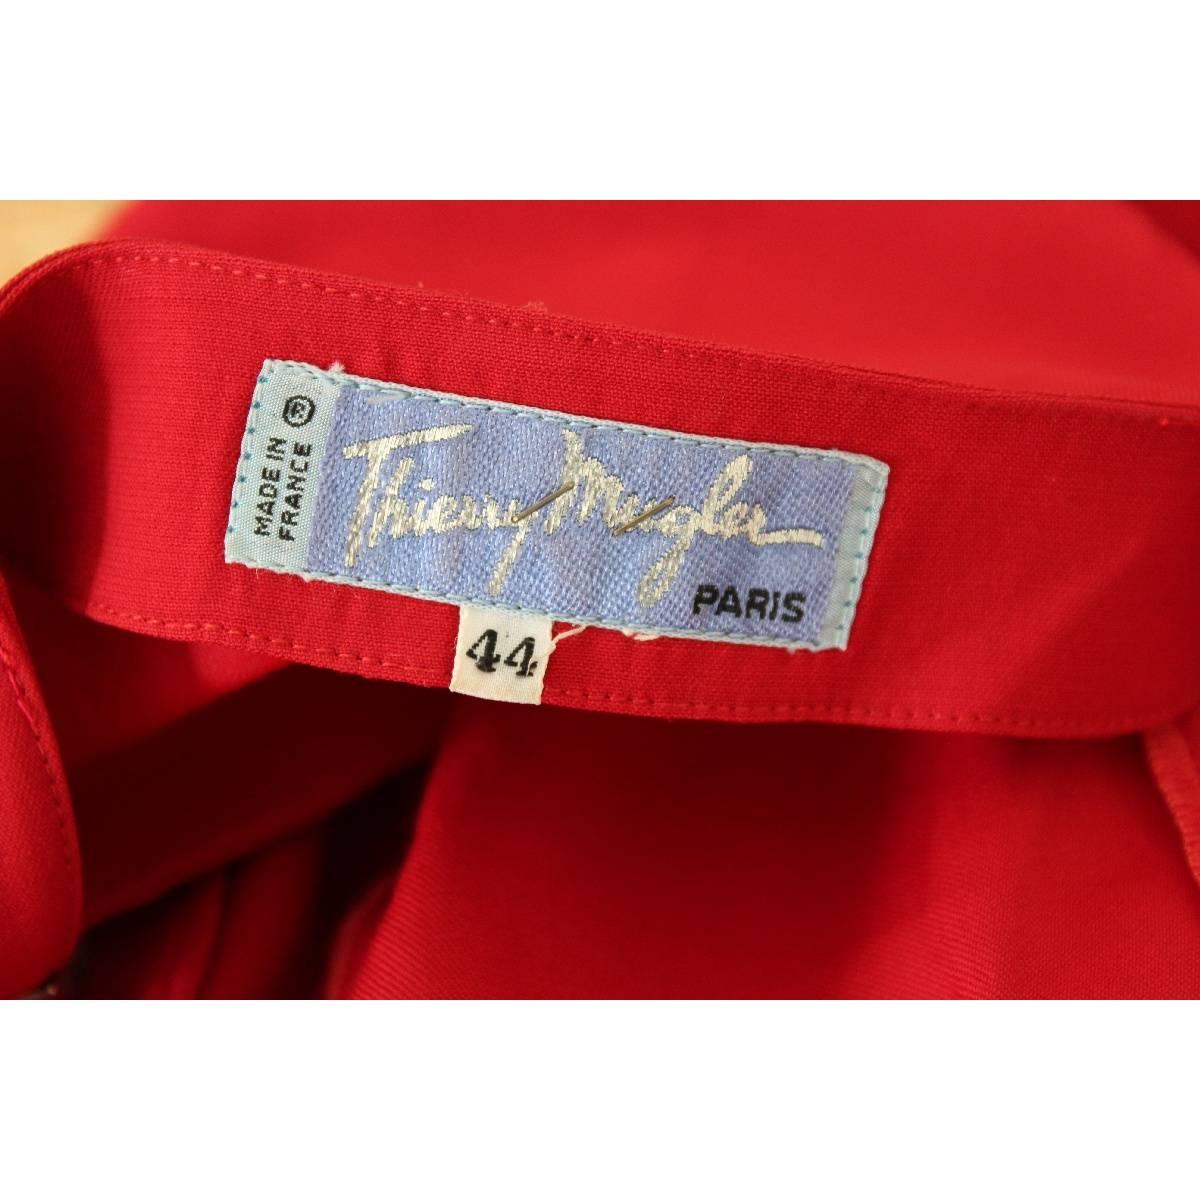 Thierry Mugler Paris 100% worsted wool red dress size 44 it vintage 1980s  1